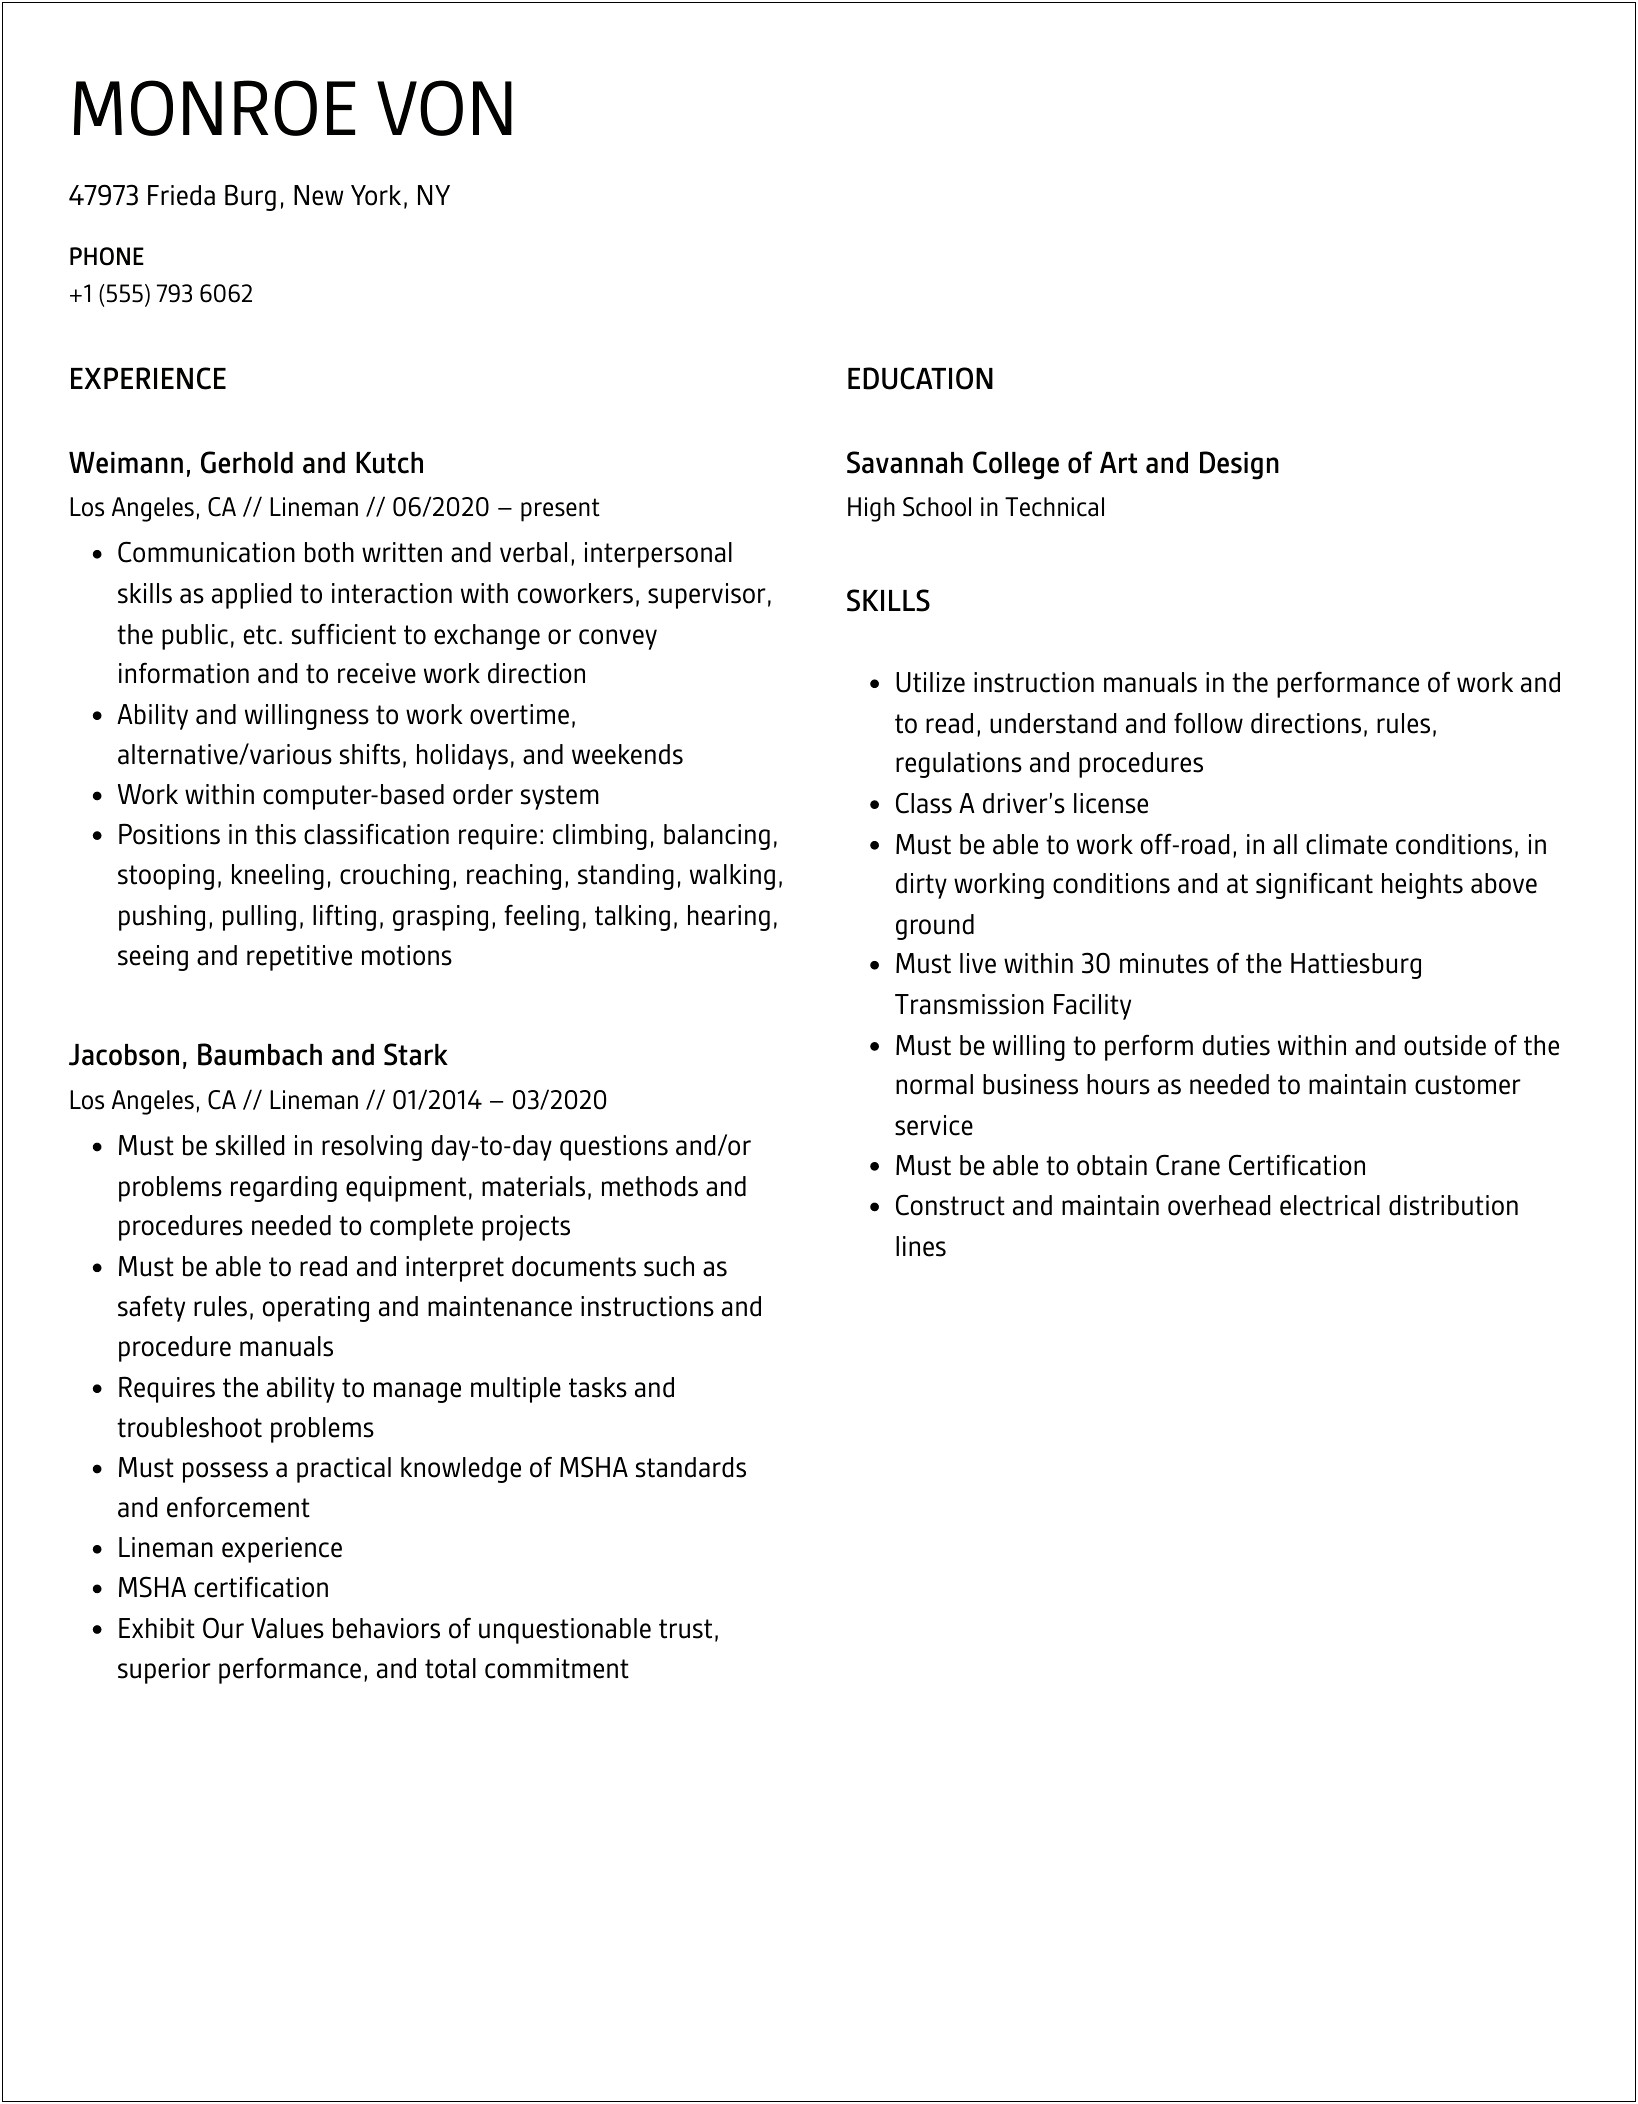 Professional Summary For A Lineman On Resume